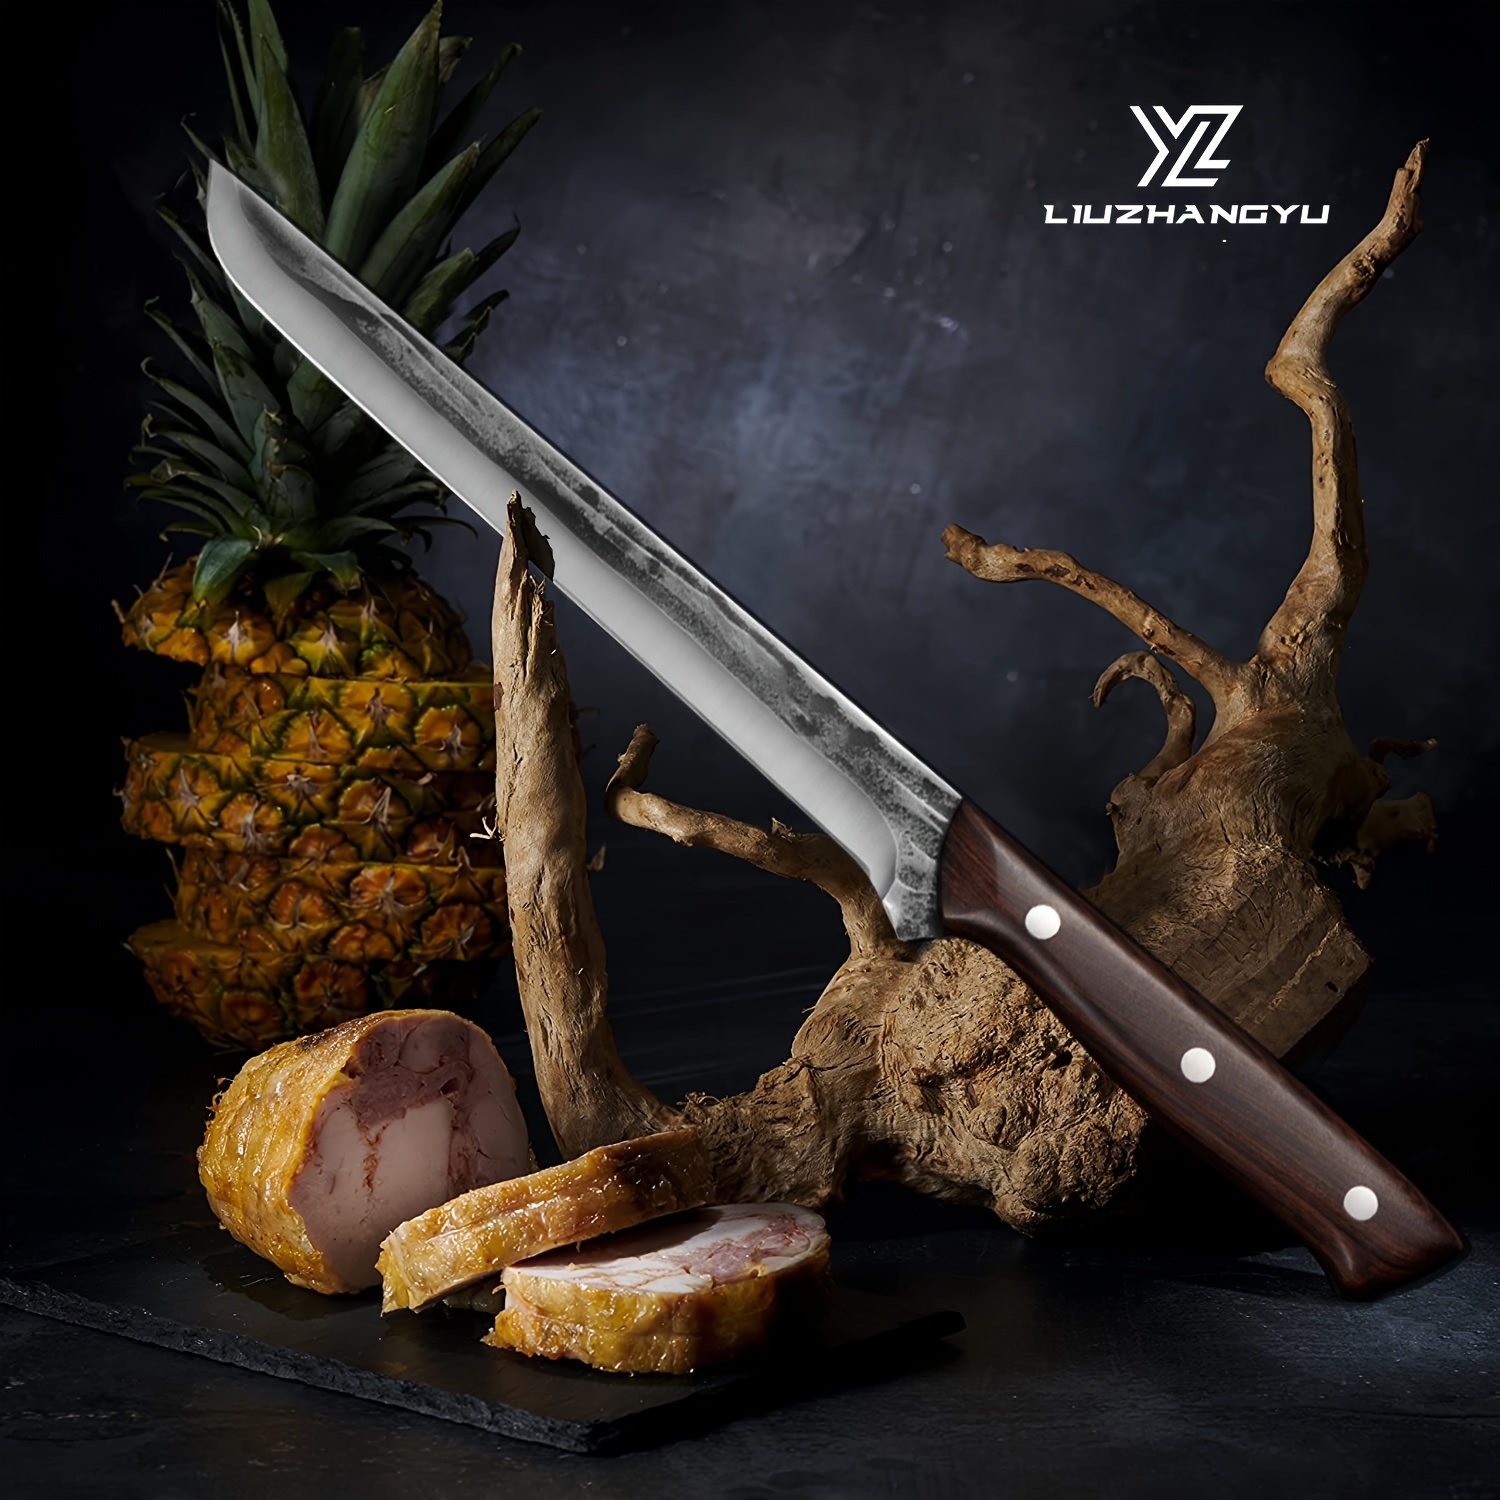 VG10 Slicing Knife, 12 inch Japanese Carving Knife Ultra Sharp Forged High  Carbon Stainless Steel Long Brisket Knife For Meat Cutting BBQ Full Tang